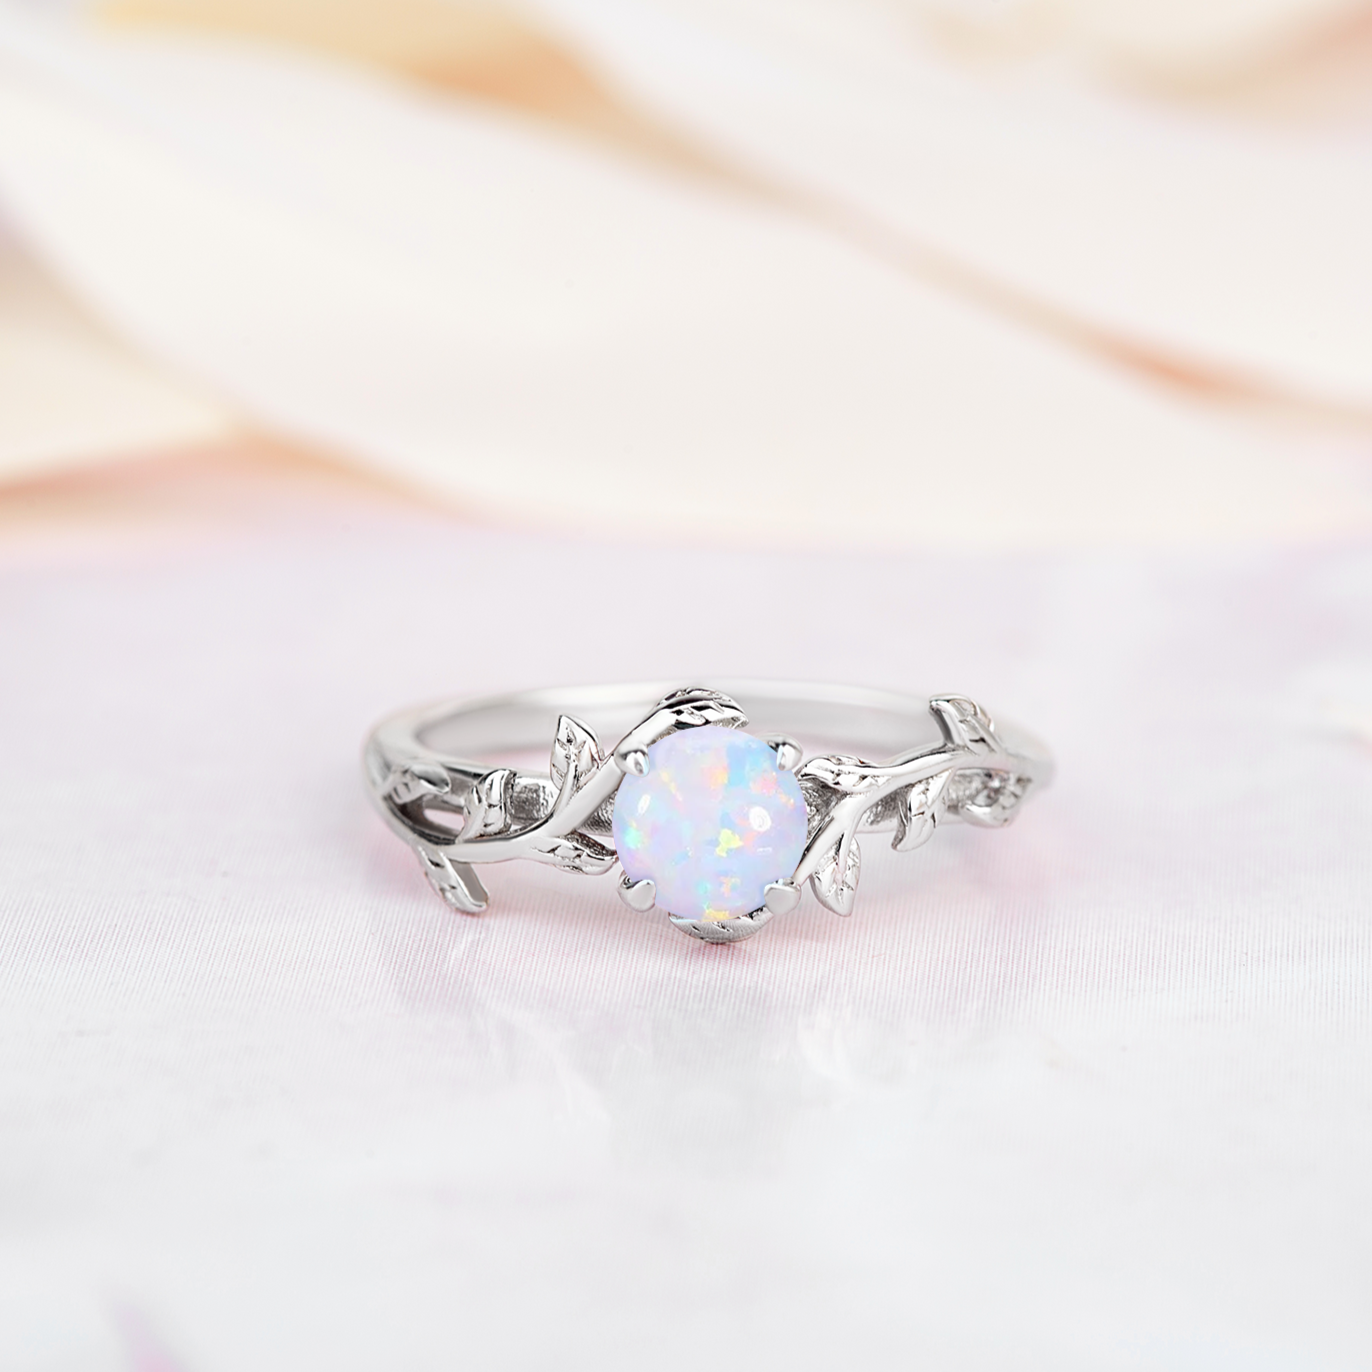 Silver Ring for women. Ring in a form of twig with opal gemstone. Ring is gold plated